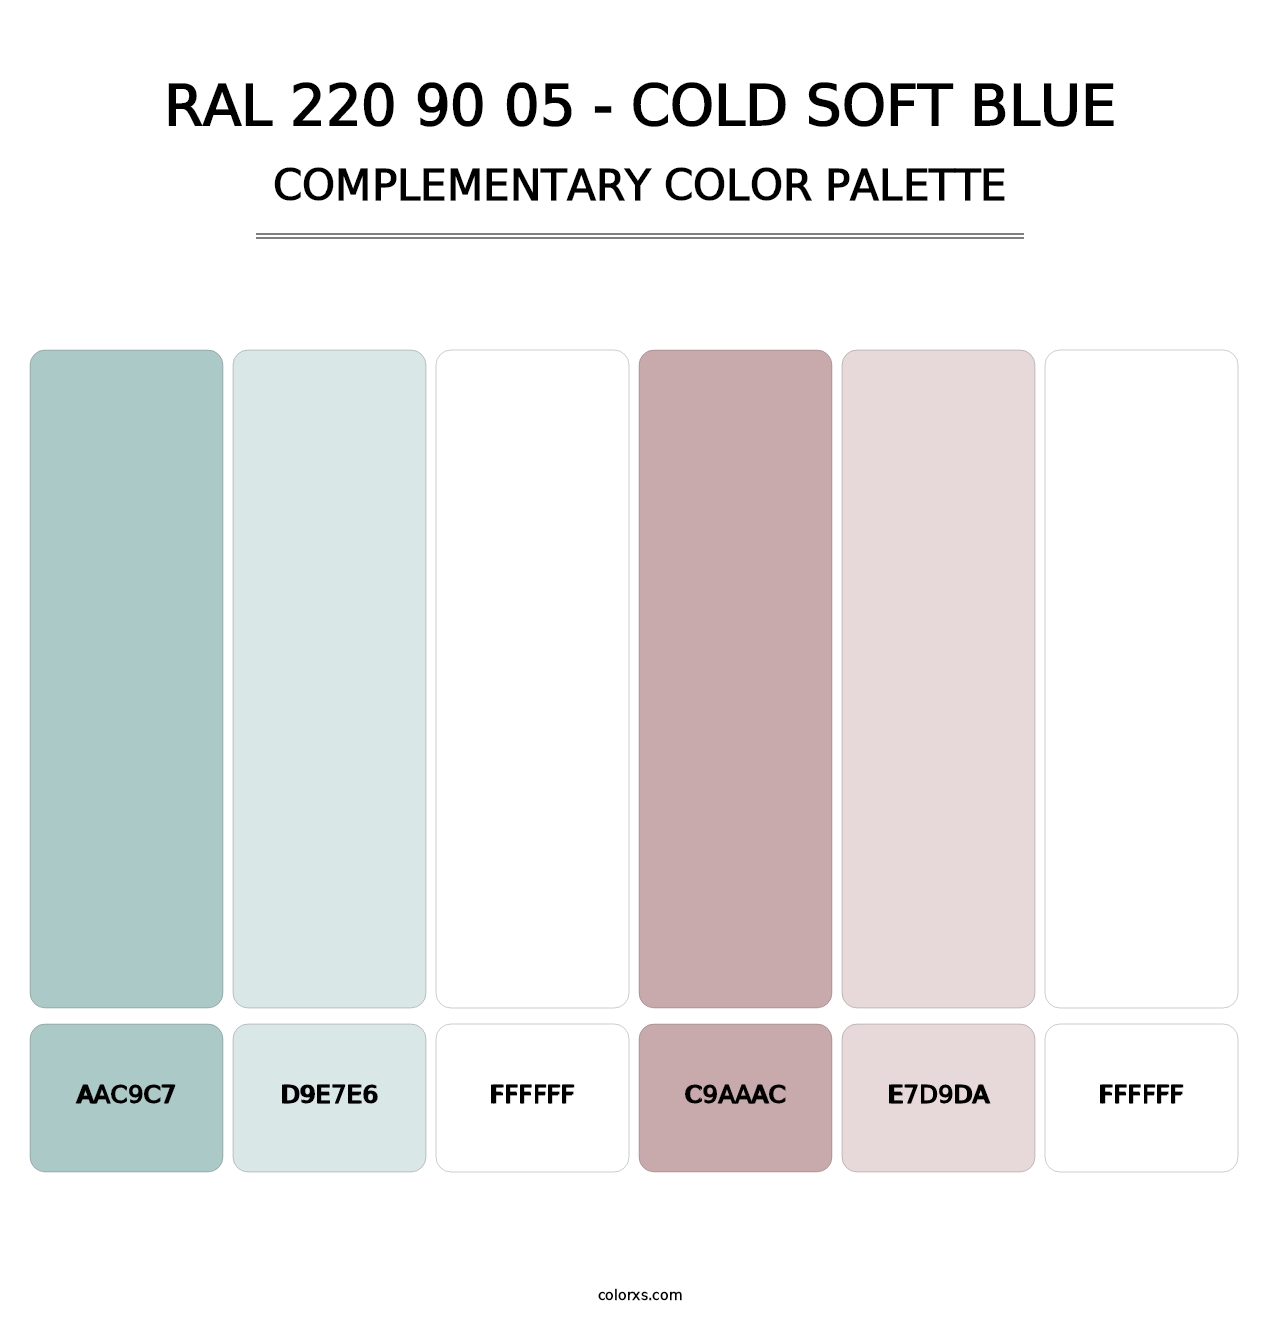 RAL 220 90 05 - Cold Soft Blue - Complementary Color Palette